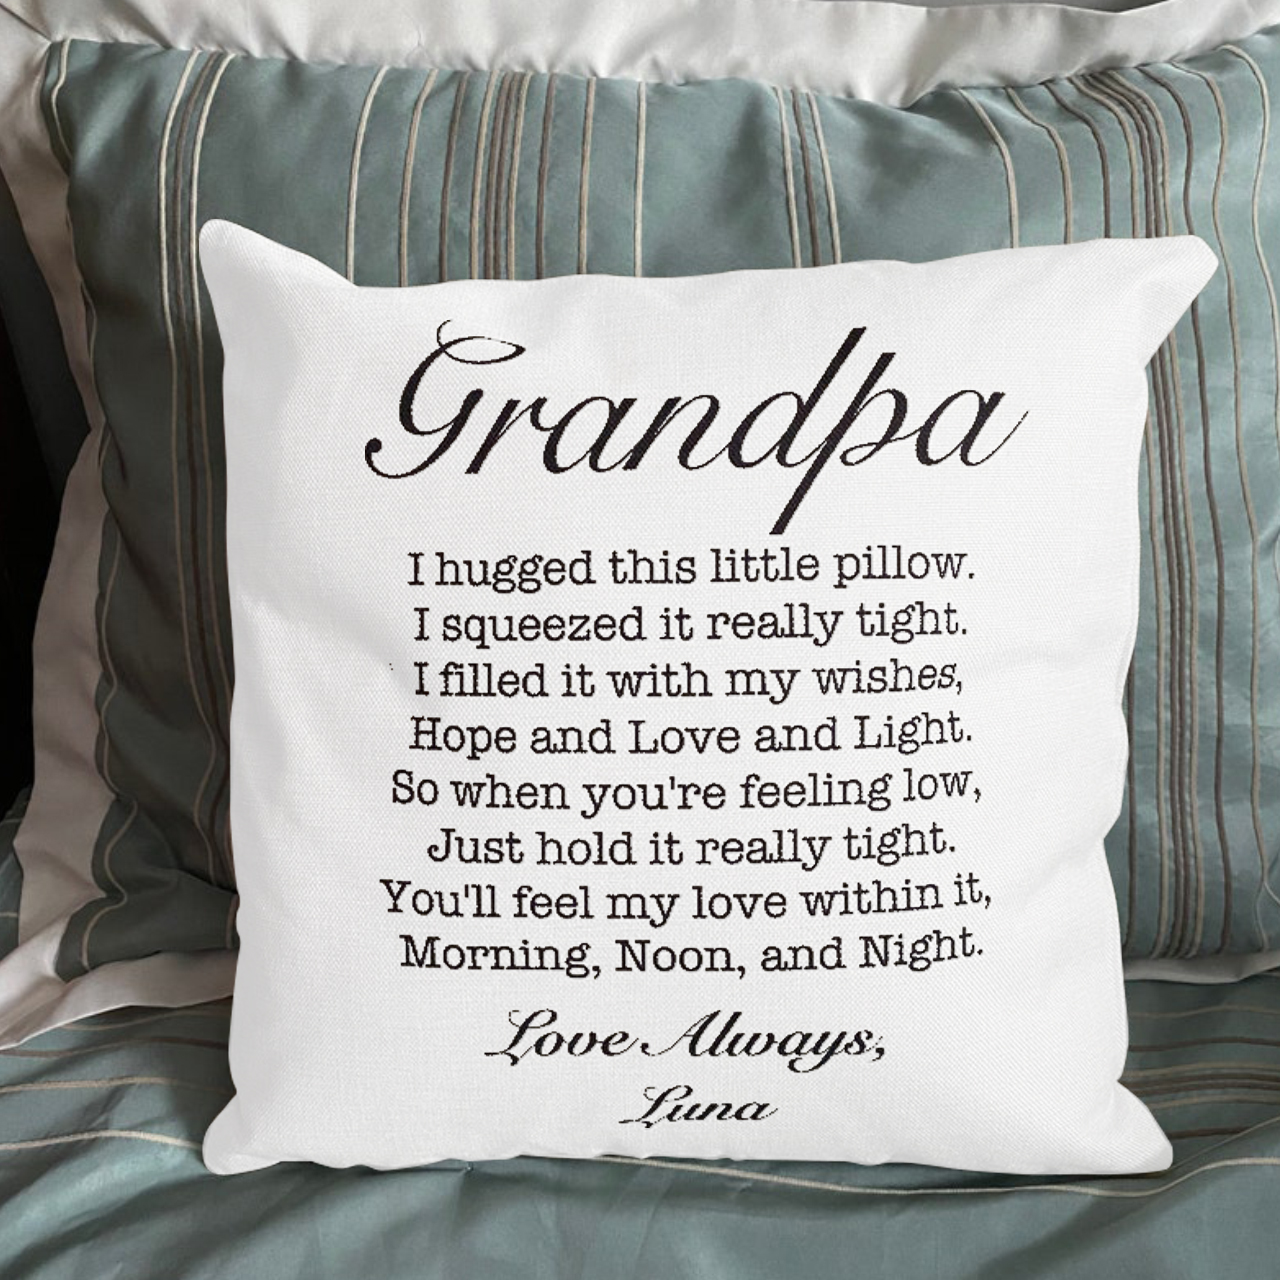 Personalized Pillowcase (We Hugged This Pillow)